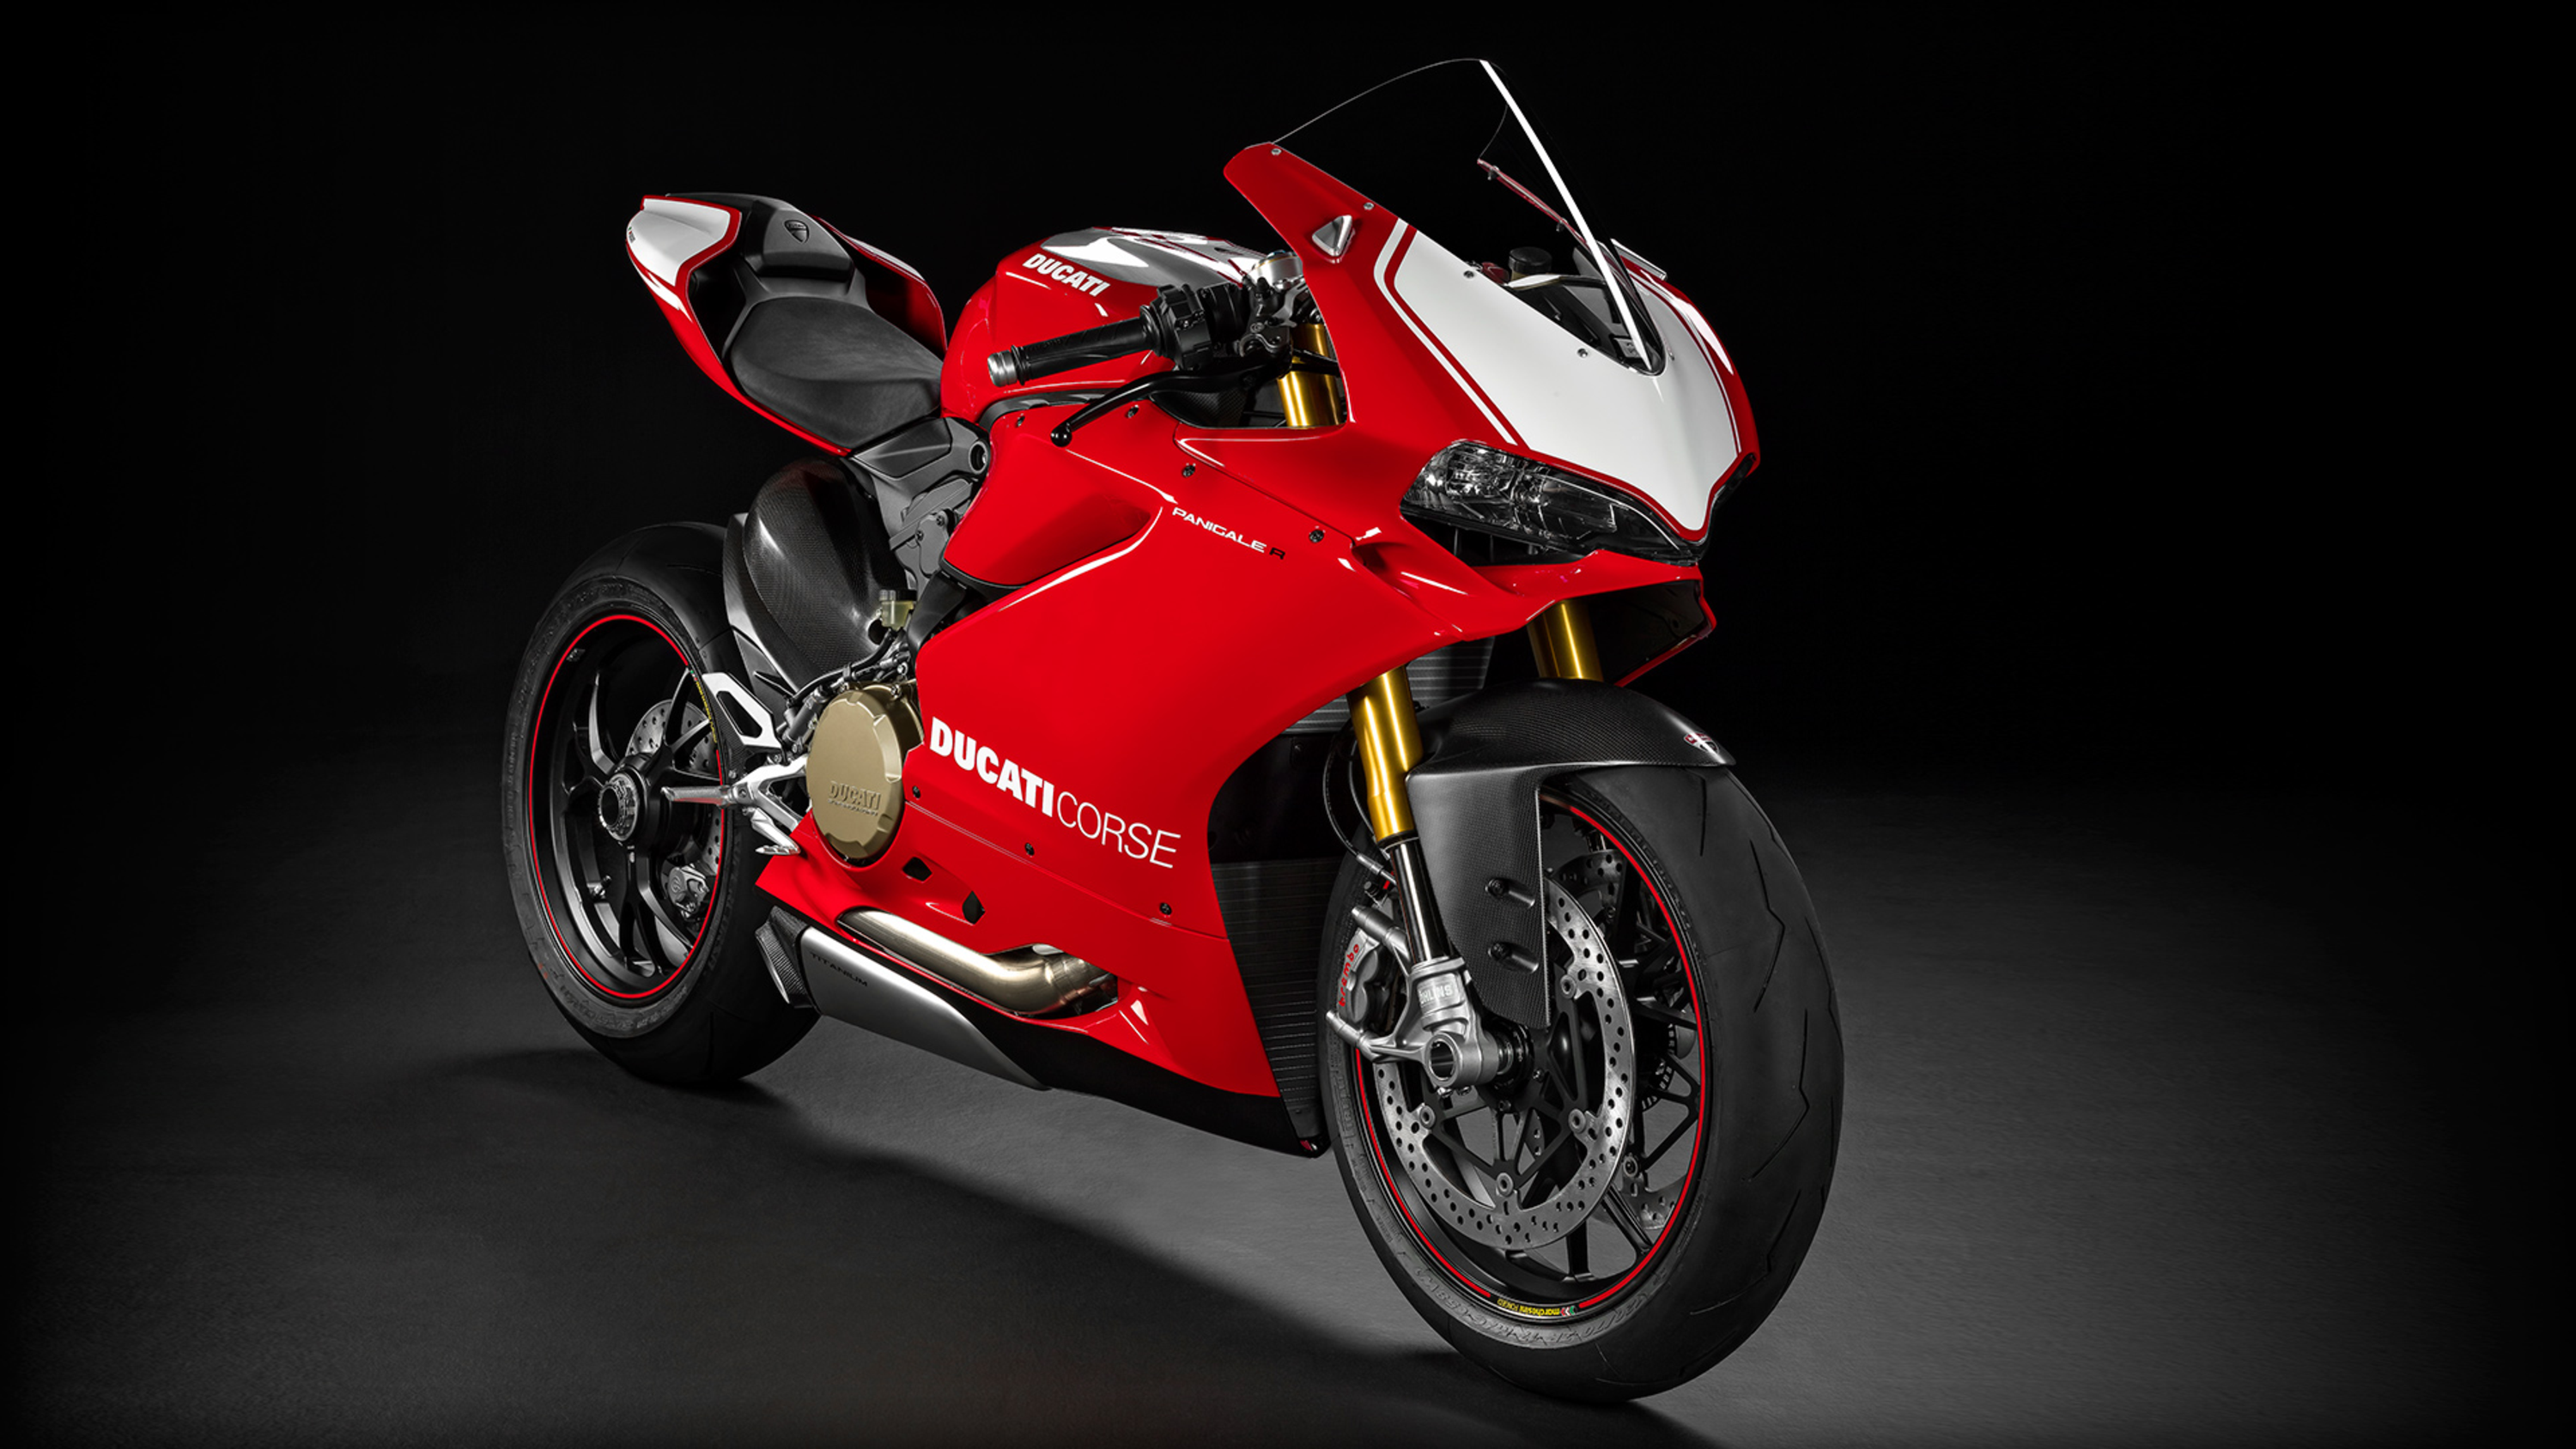 Ducati 1199 Panigale 1199 Panigale R ABS (2013 - 17)